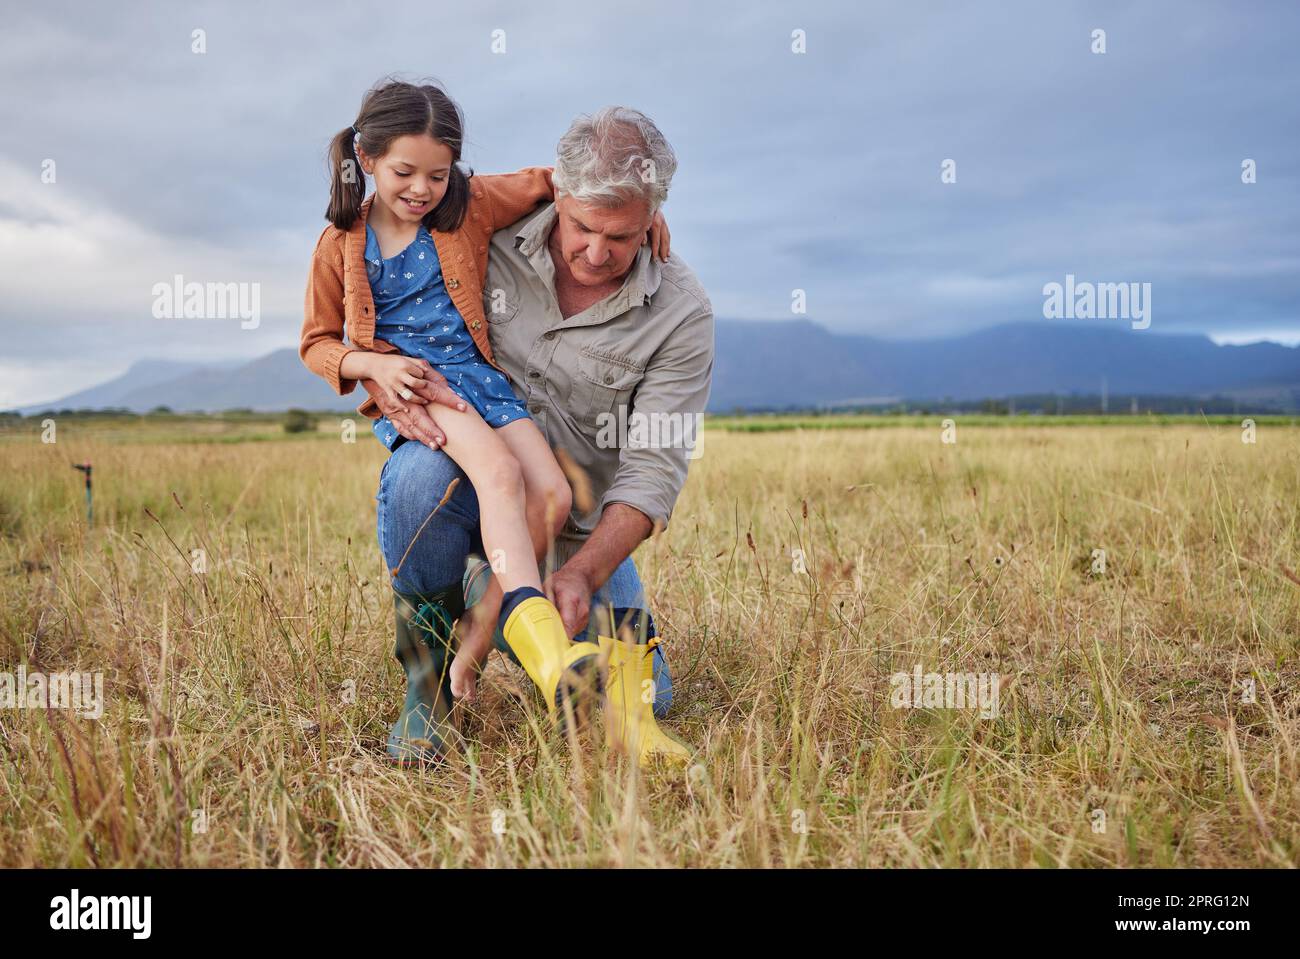 Happy family bonding on farm grandparent and girl having fun in nature, prepare for walk together. Smiling child and caring grandfather exploring outdoors, enjoying a walk in the countryside or field Stock Photo